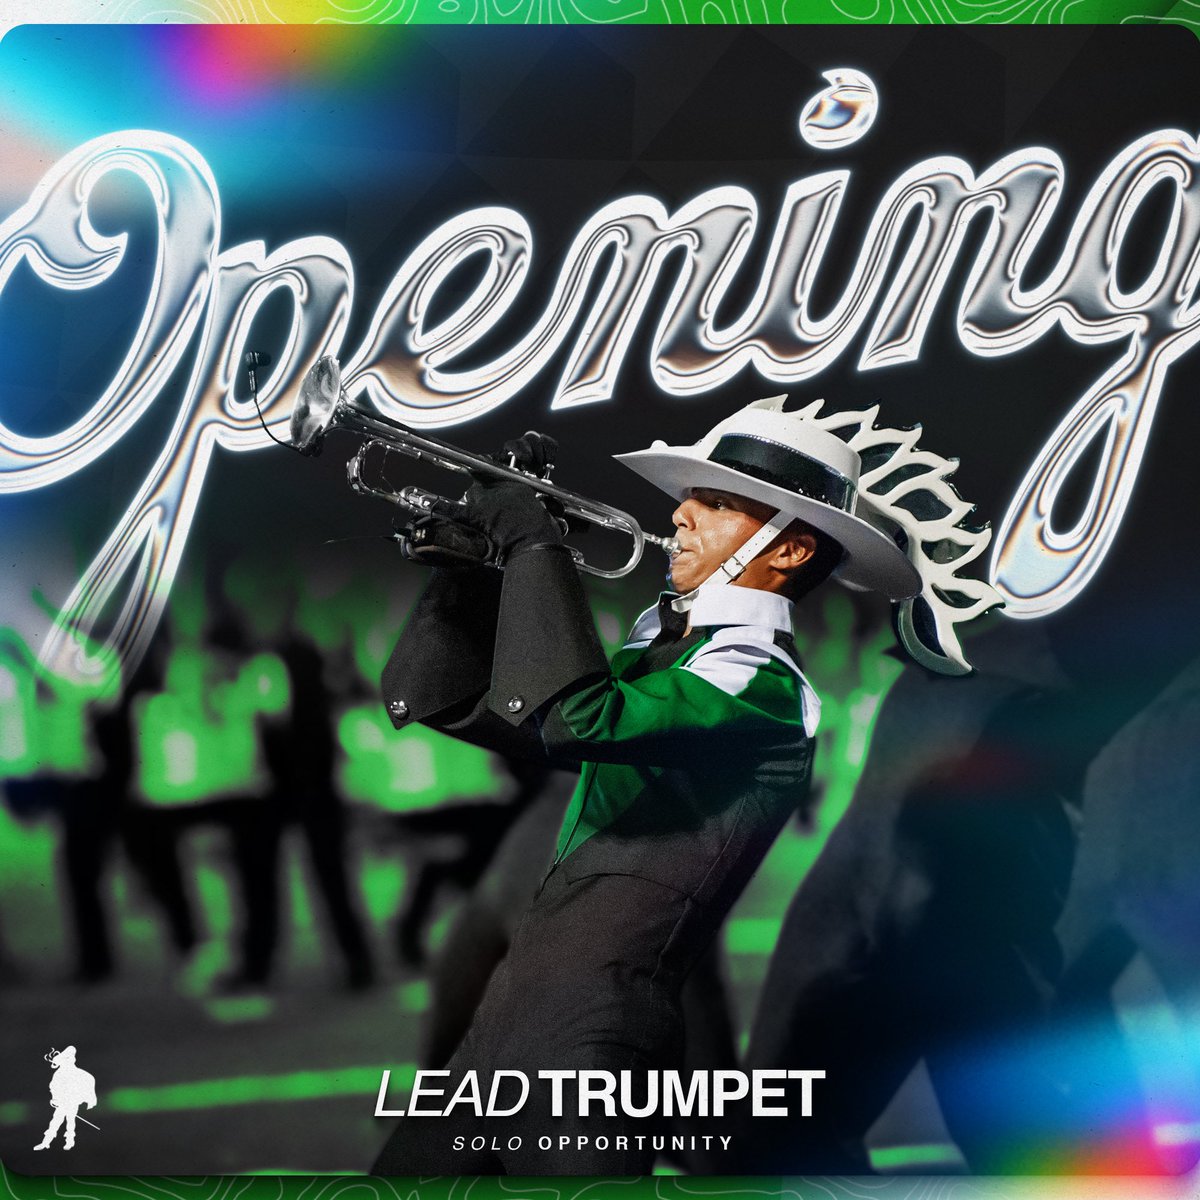 The Cavaliers are looking for a lead trumpet to join us this season. This includes the potential to be a 2024 soloist 👀 Interested? Email cheryl.lee@cavaliers.org for more information ⚙️